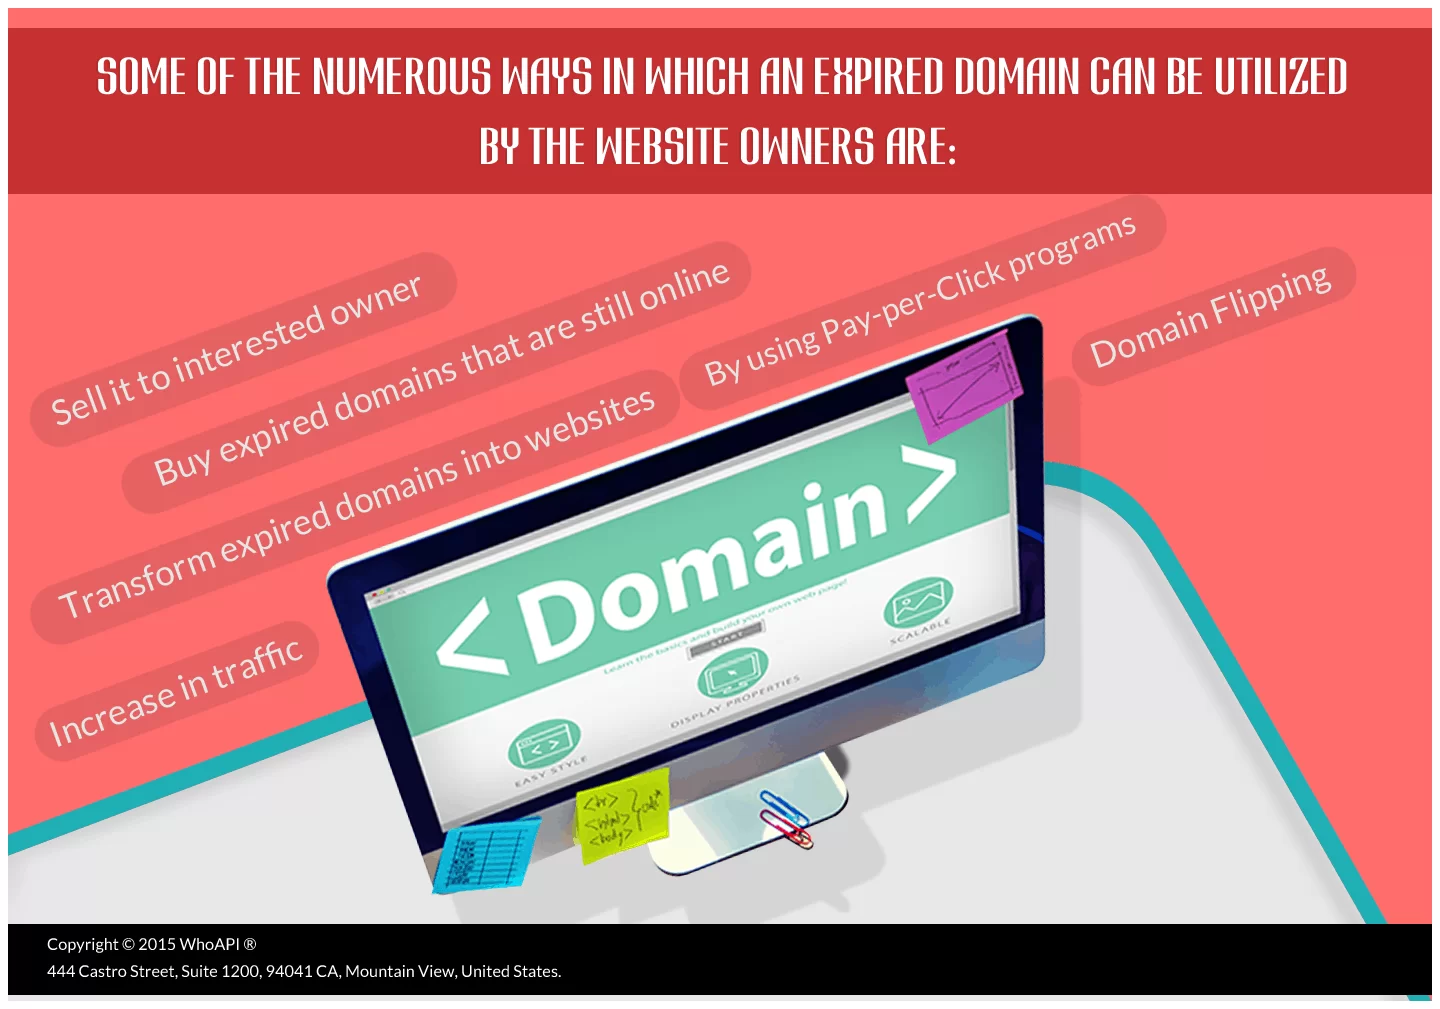 Finding and Utilizing Expired Domains for SEO5